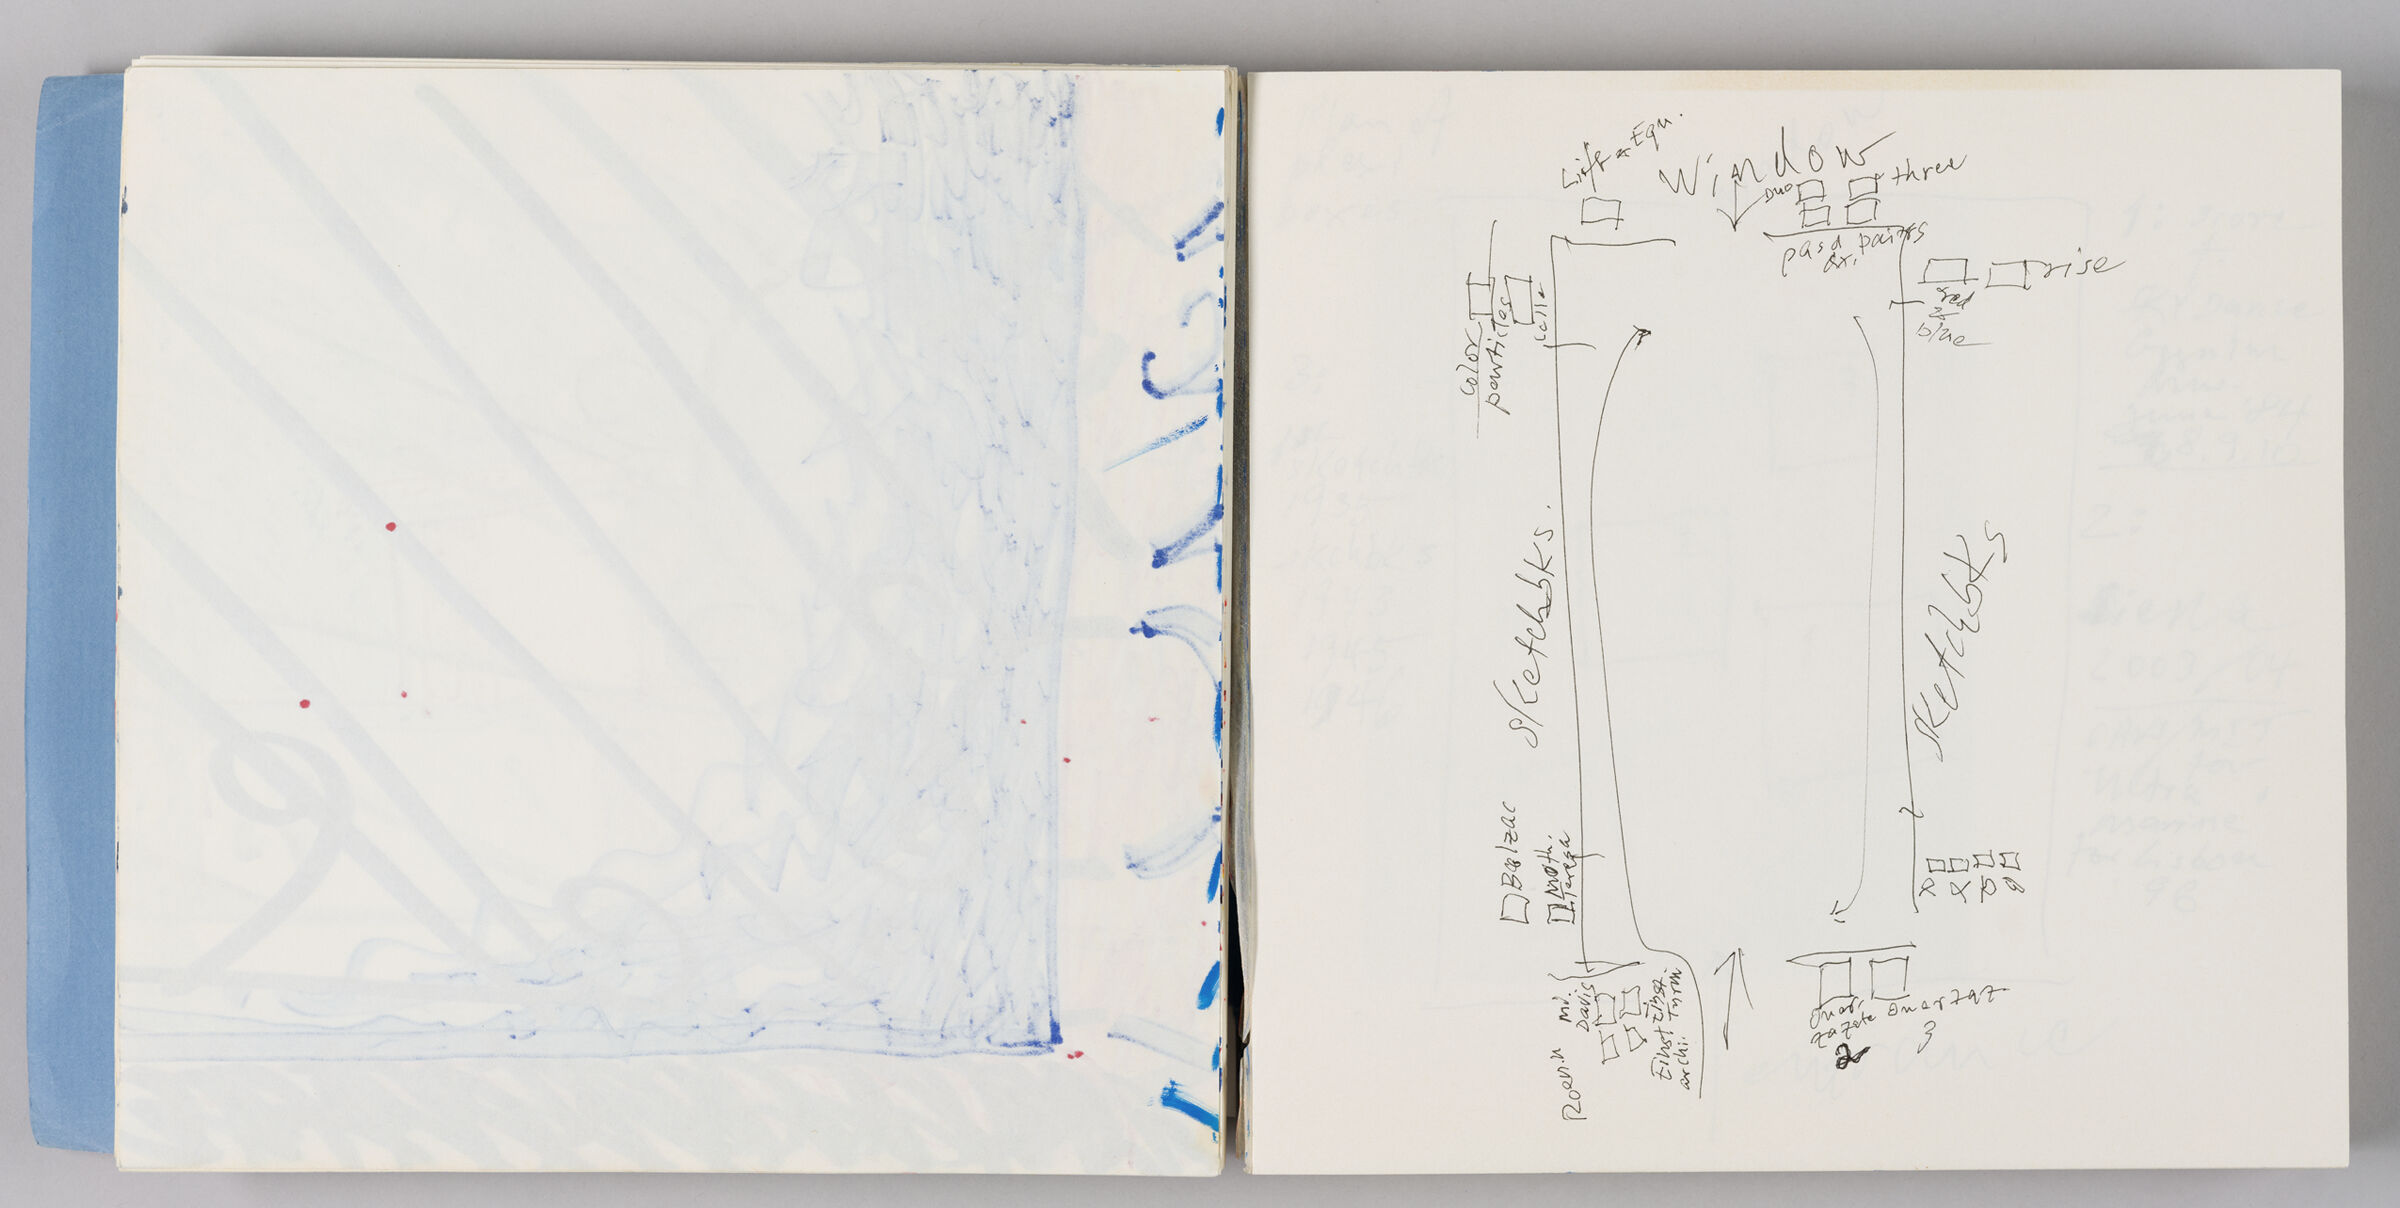 Untitled (Bleed-Through Of Previous Page, Left Page); Untitled (Layout For Gallery Show Of Sketchbooks, Right Page)
